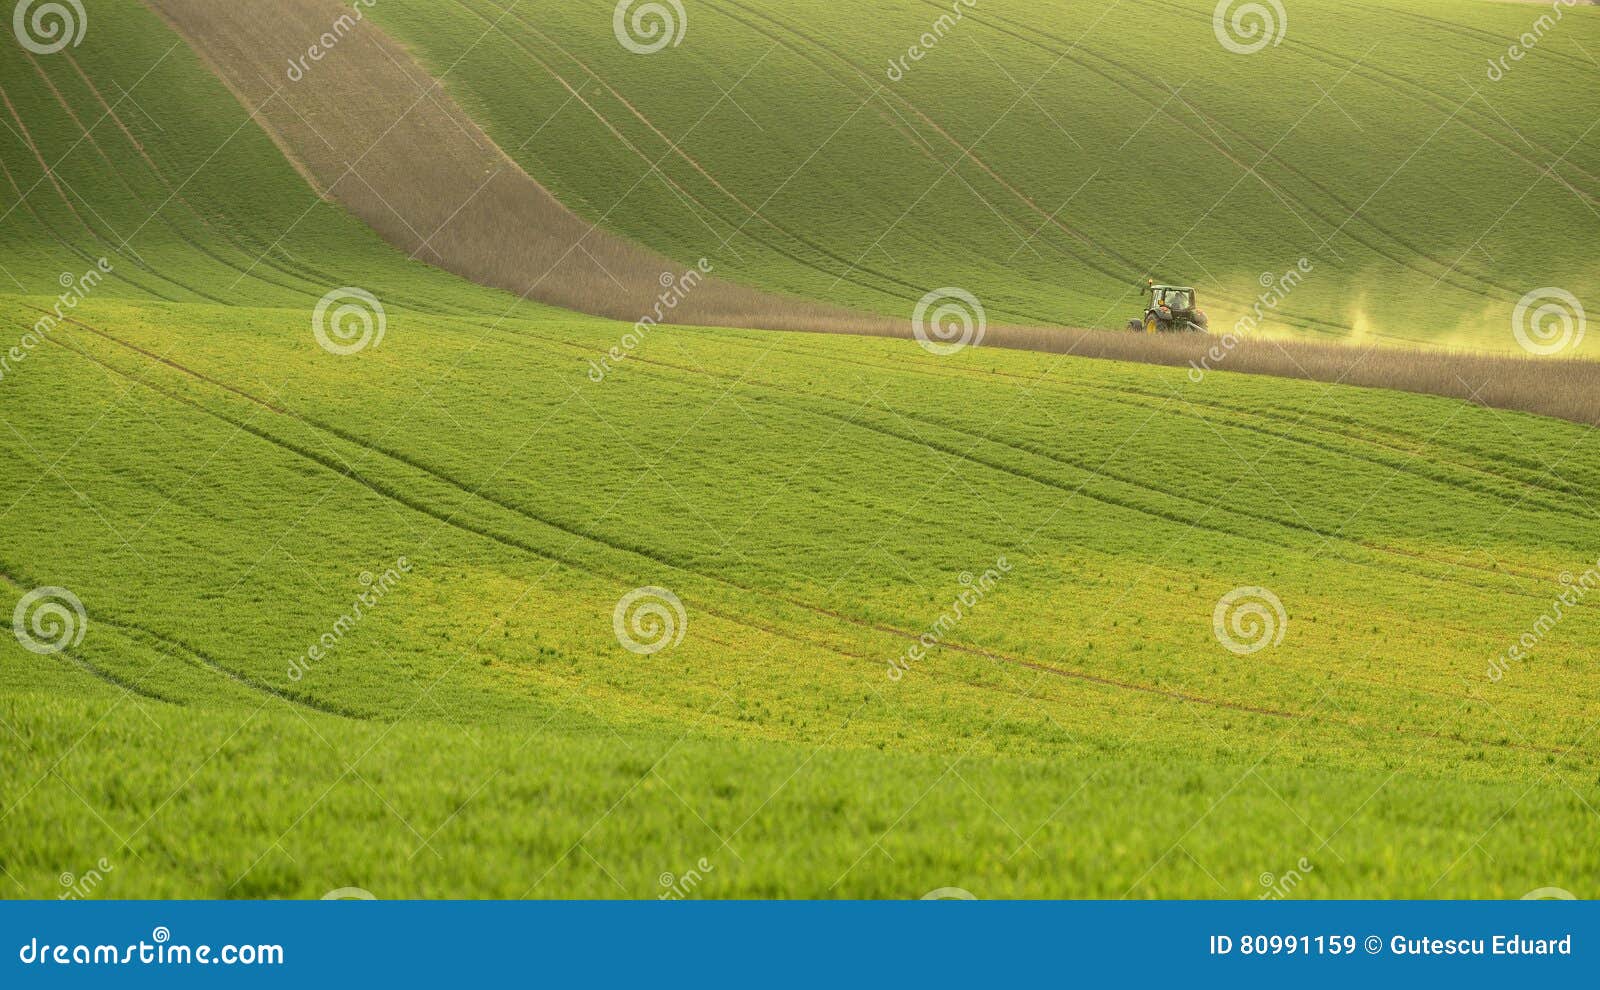 agriculture on moravia rolling hills with wheat filds and tractor